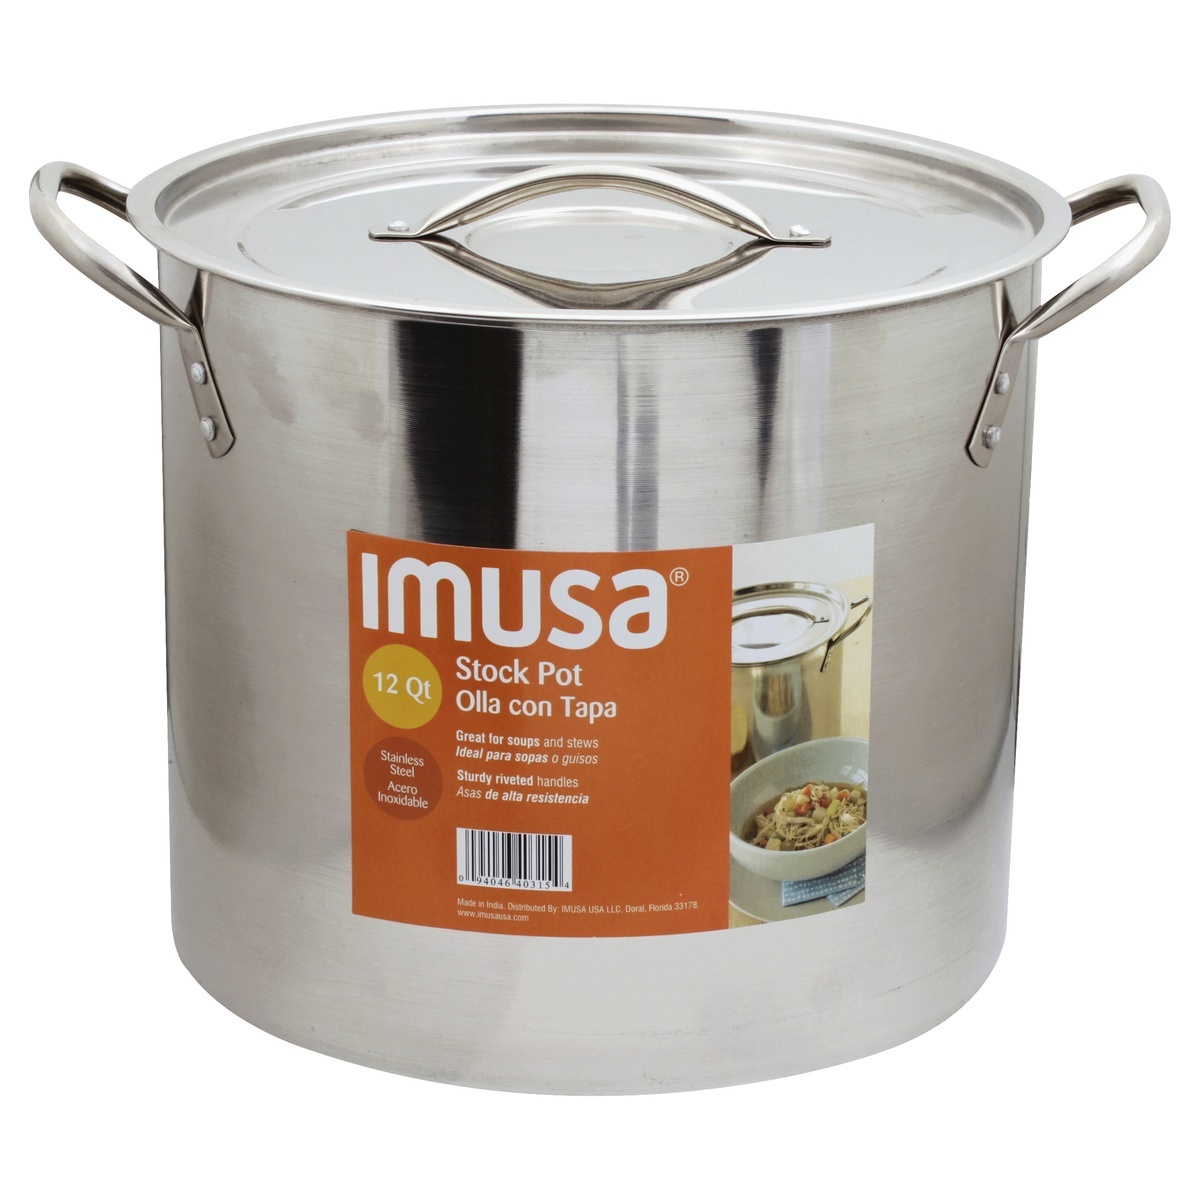 slide 1 of 1, Imusa Stainless Stock Pot 12Qt, 1 ct